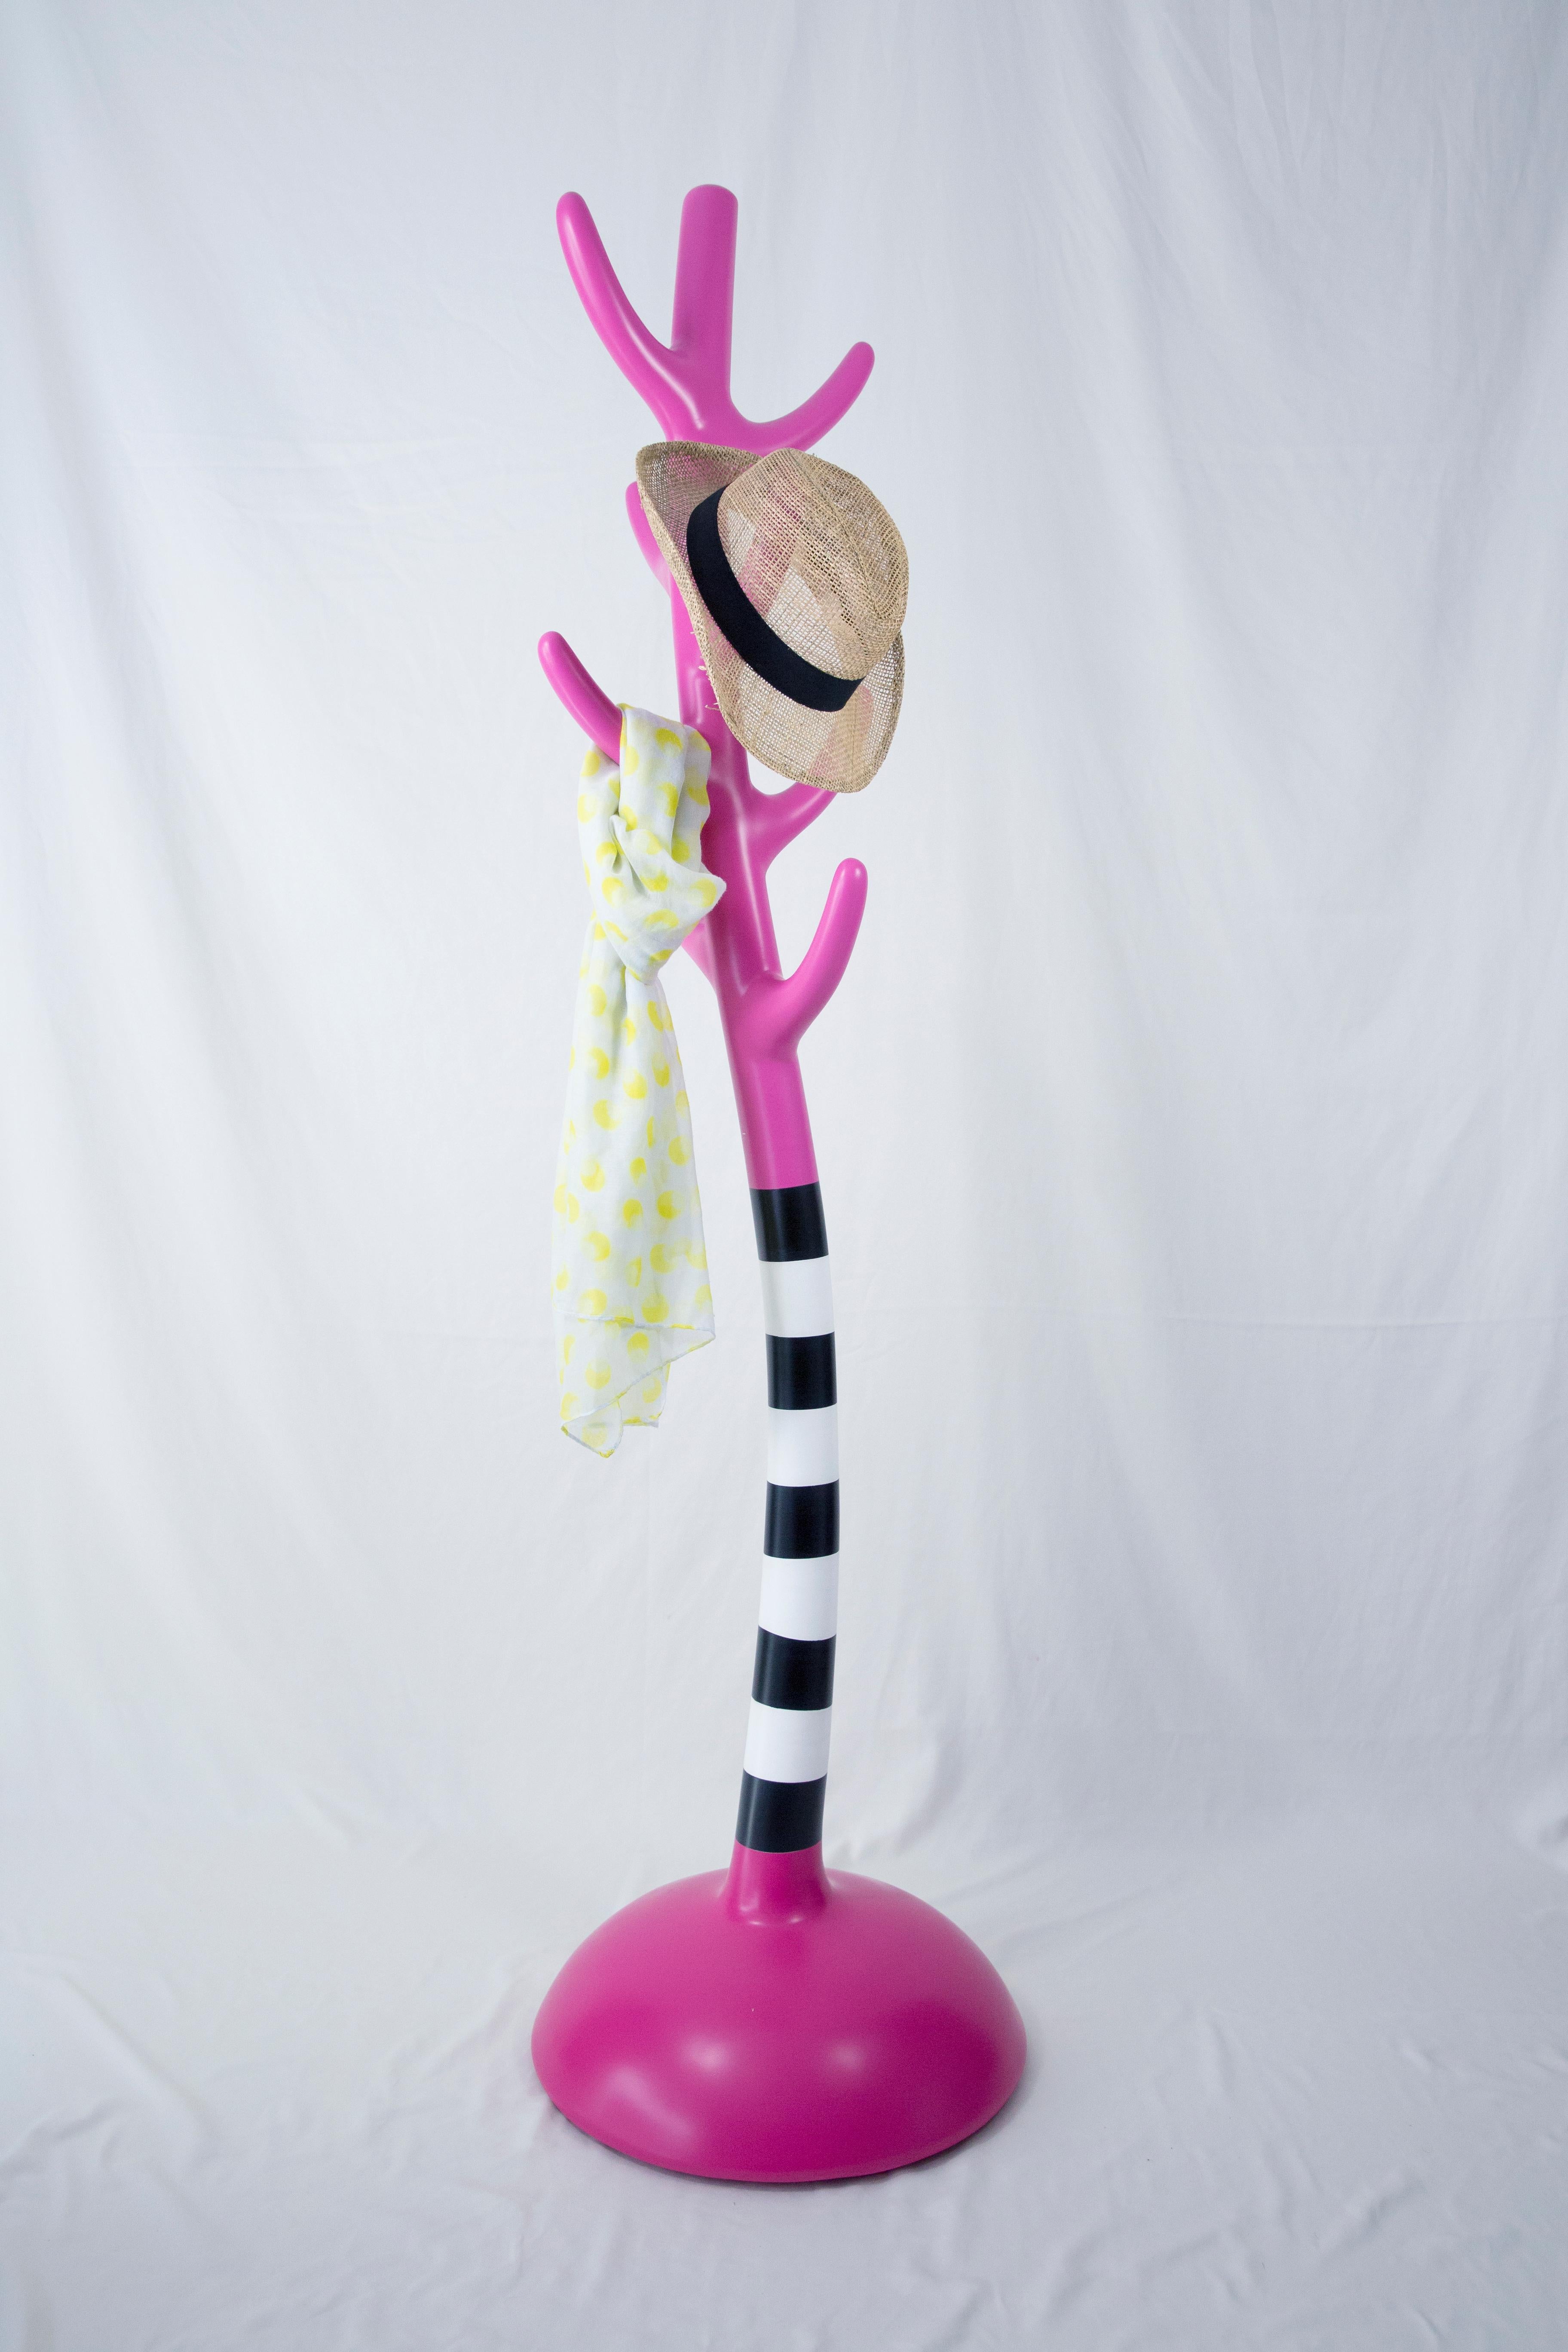 Crooked Coat Rack: Vibrant Pink Sculptural Artistic Hanger In New Condition For Sale In Istanbul, Maltepe